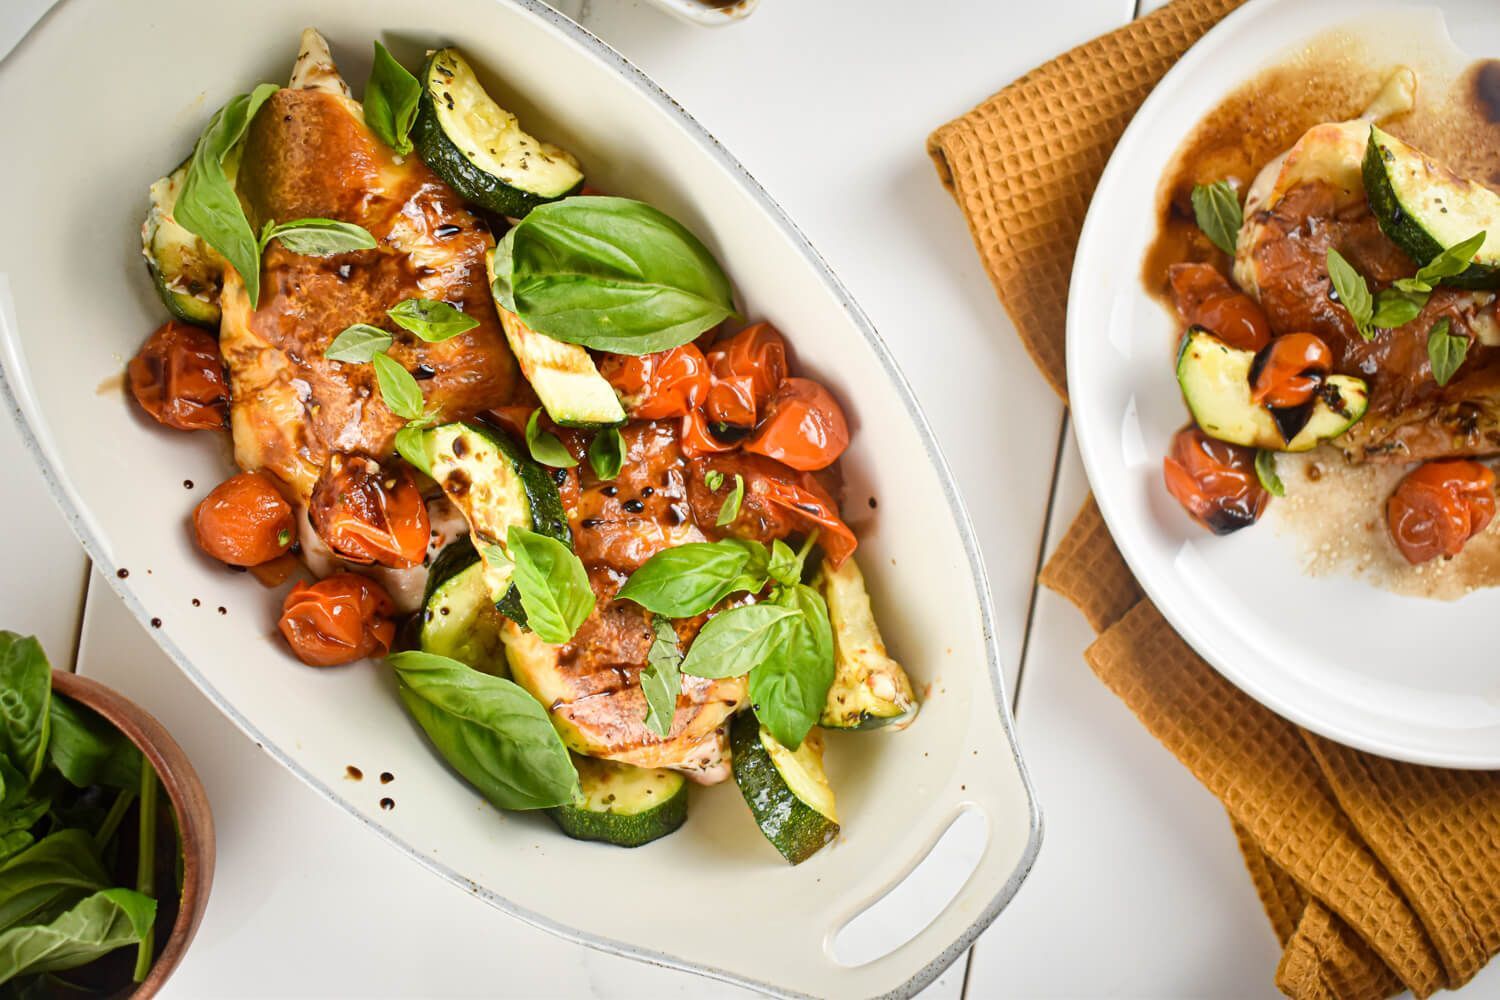 Caprese chicken with zucchini, tomatoes, basil, and cheese in a casserole dish.